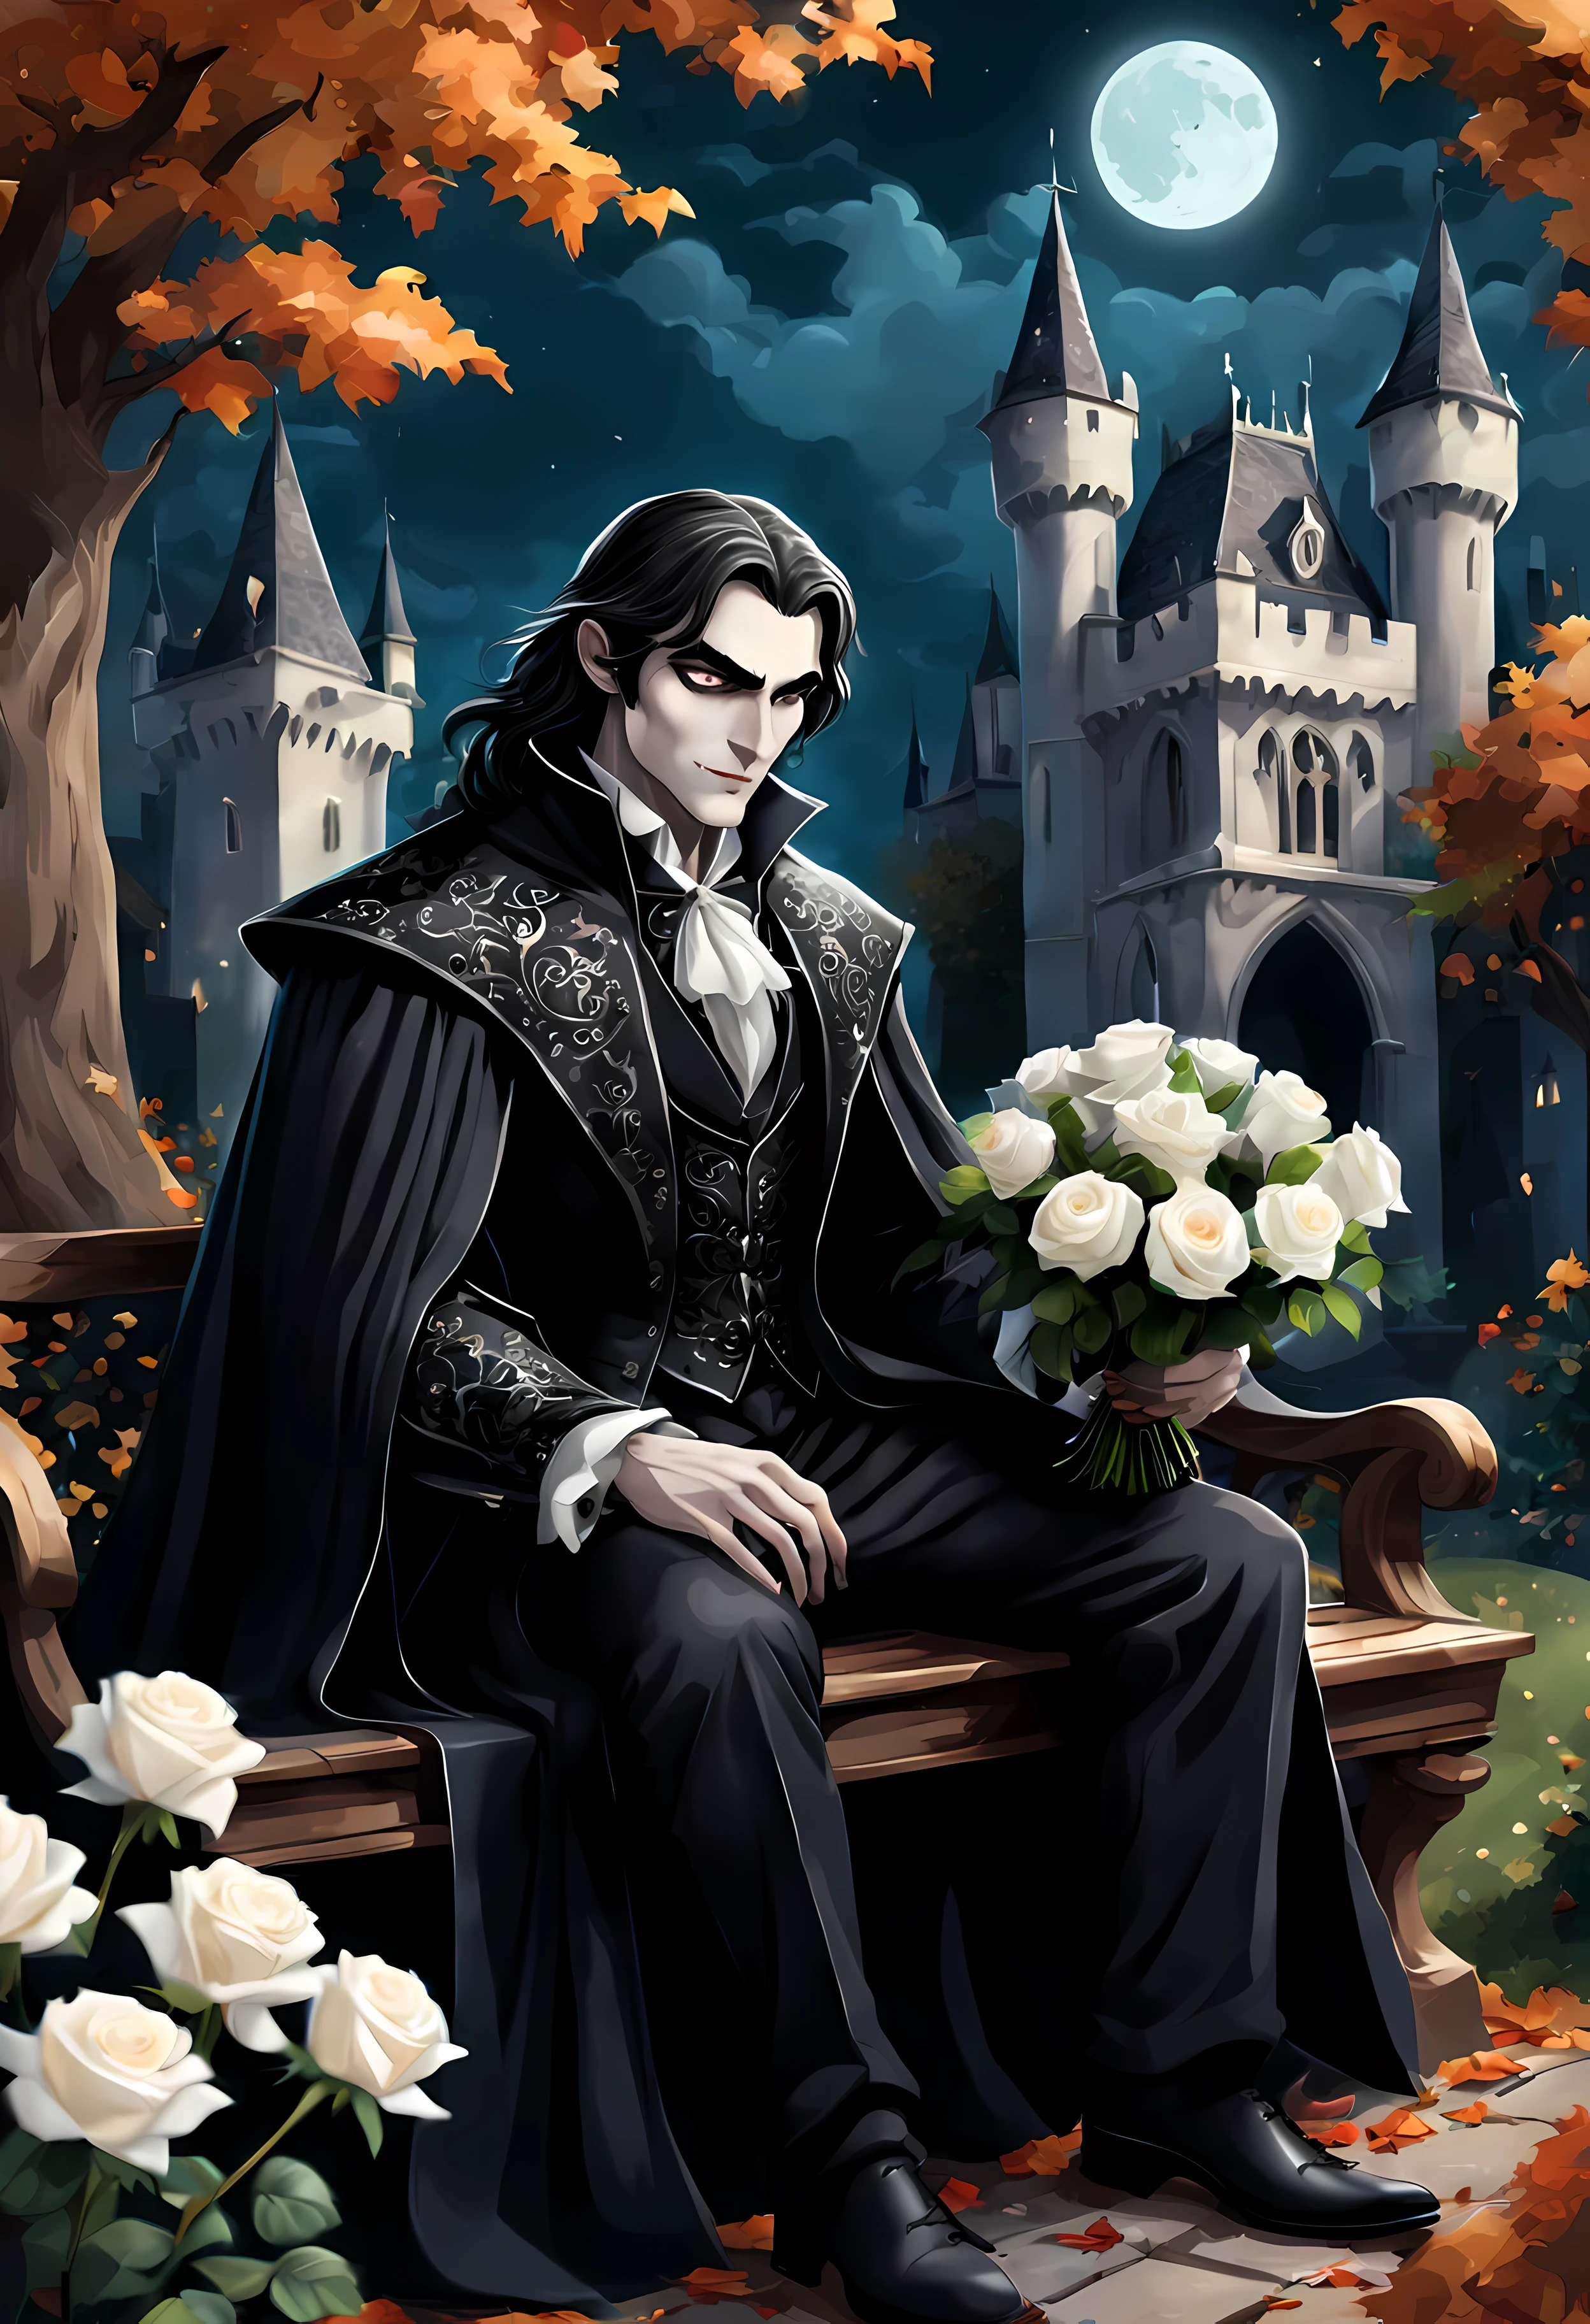 Perfect HAnds, mAsterpiece in mAximum 16K resolution, (cute cArtoon style:1.3), A (((独自的))) ((特写)) of A hAndsome vAmpire (mAle) sitting on An elegAnt bench in A moonlit Autumn gArden, ((complex rich gothic pAtterns)), the vAmpire is weAring An elegAnt flowing gown, he hAs (鲜绿色的眼睛), And long blAck hAir, ((holding A bouquet of white roses in his hAnds)), gothic cAstle in the bAckground. | ((更多的_DetAil))